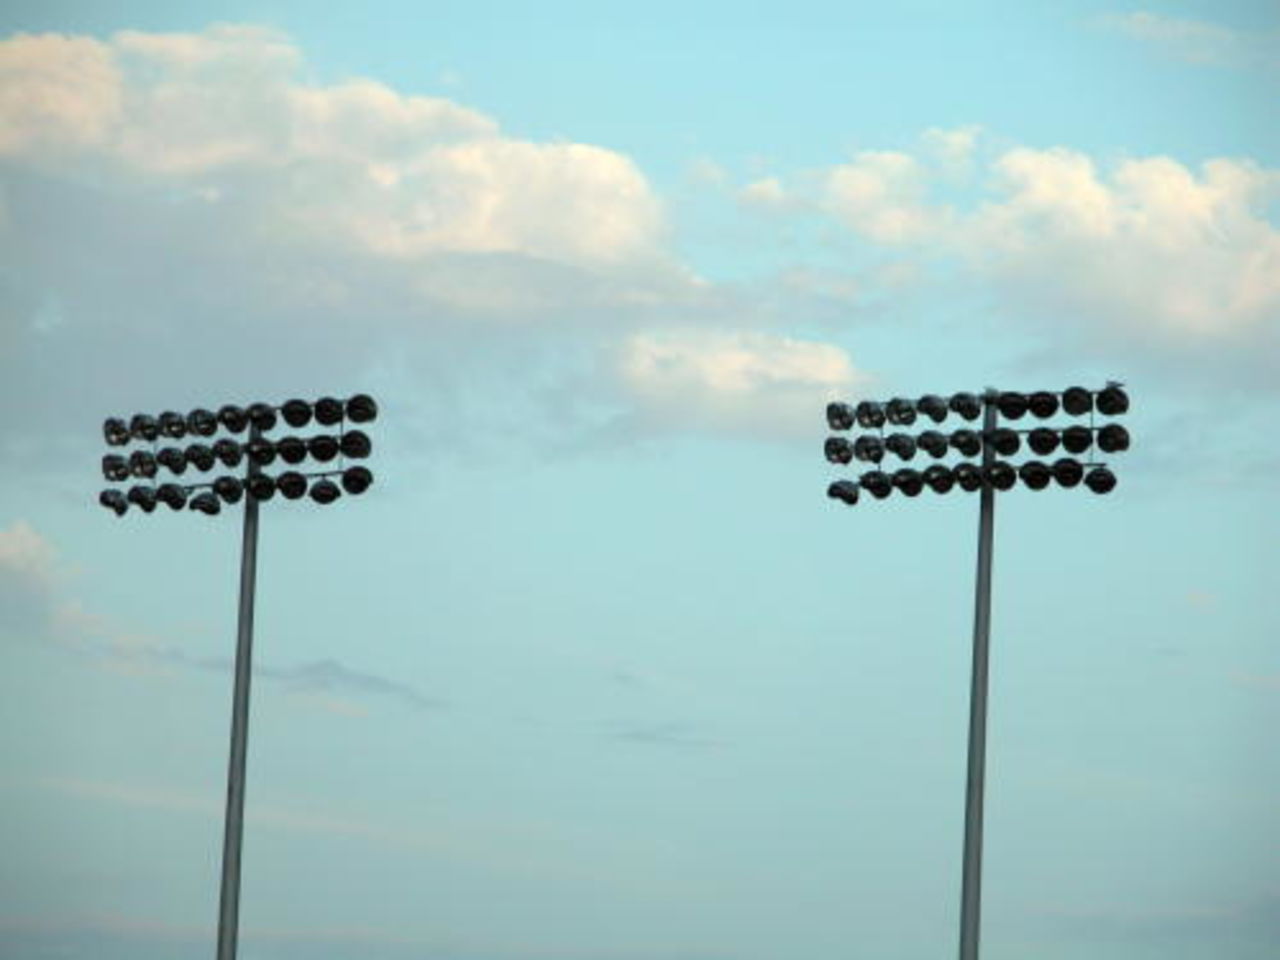 The floodlights at Hove go on the blink during the National League match Sharks v Hawks